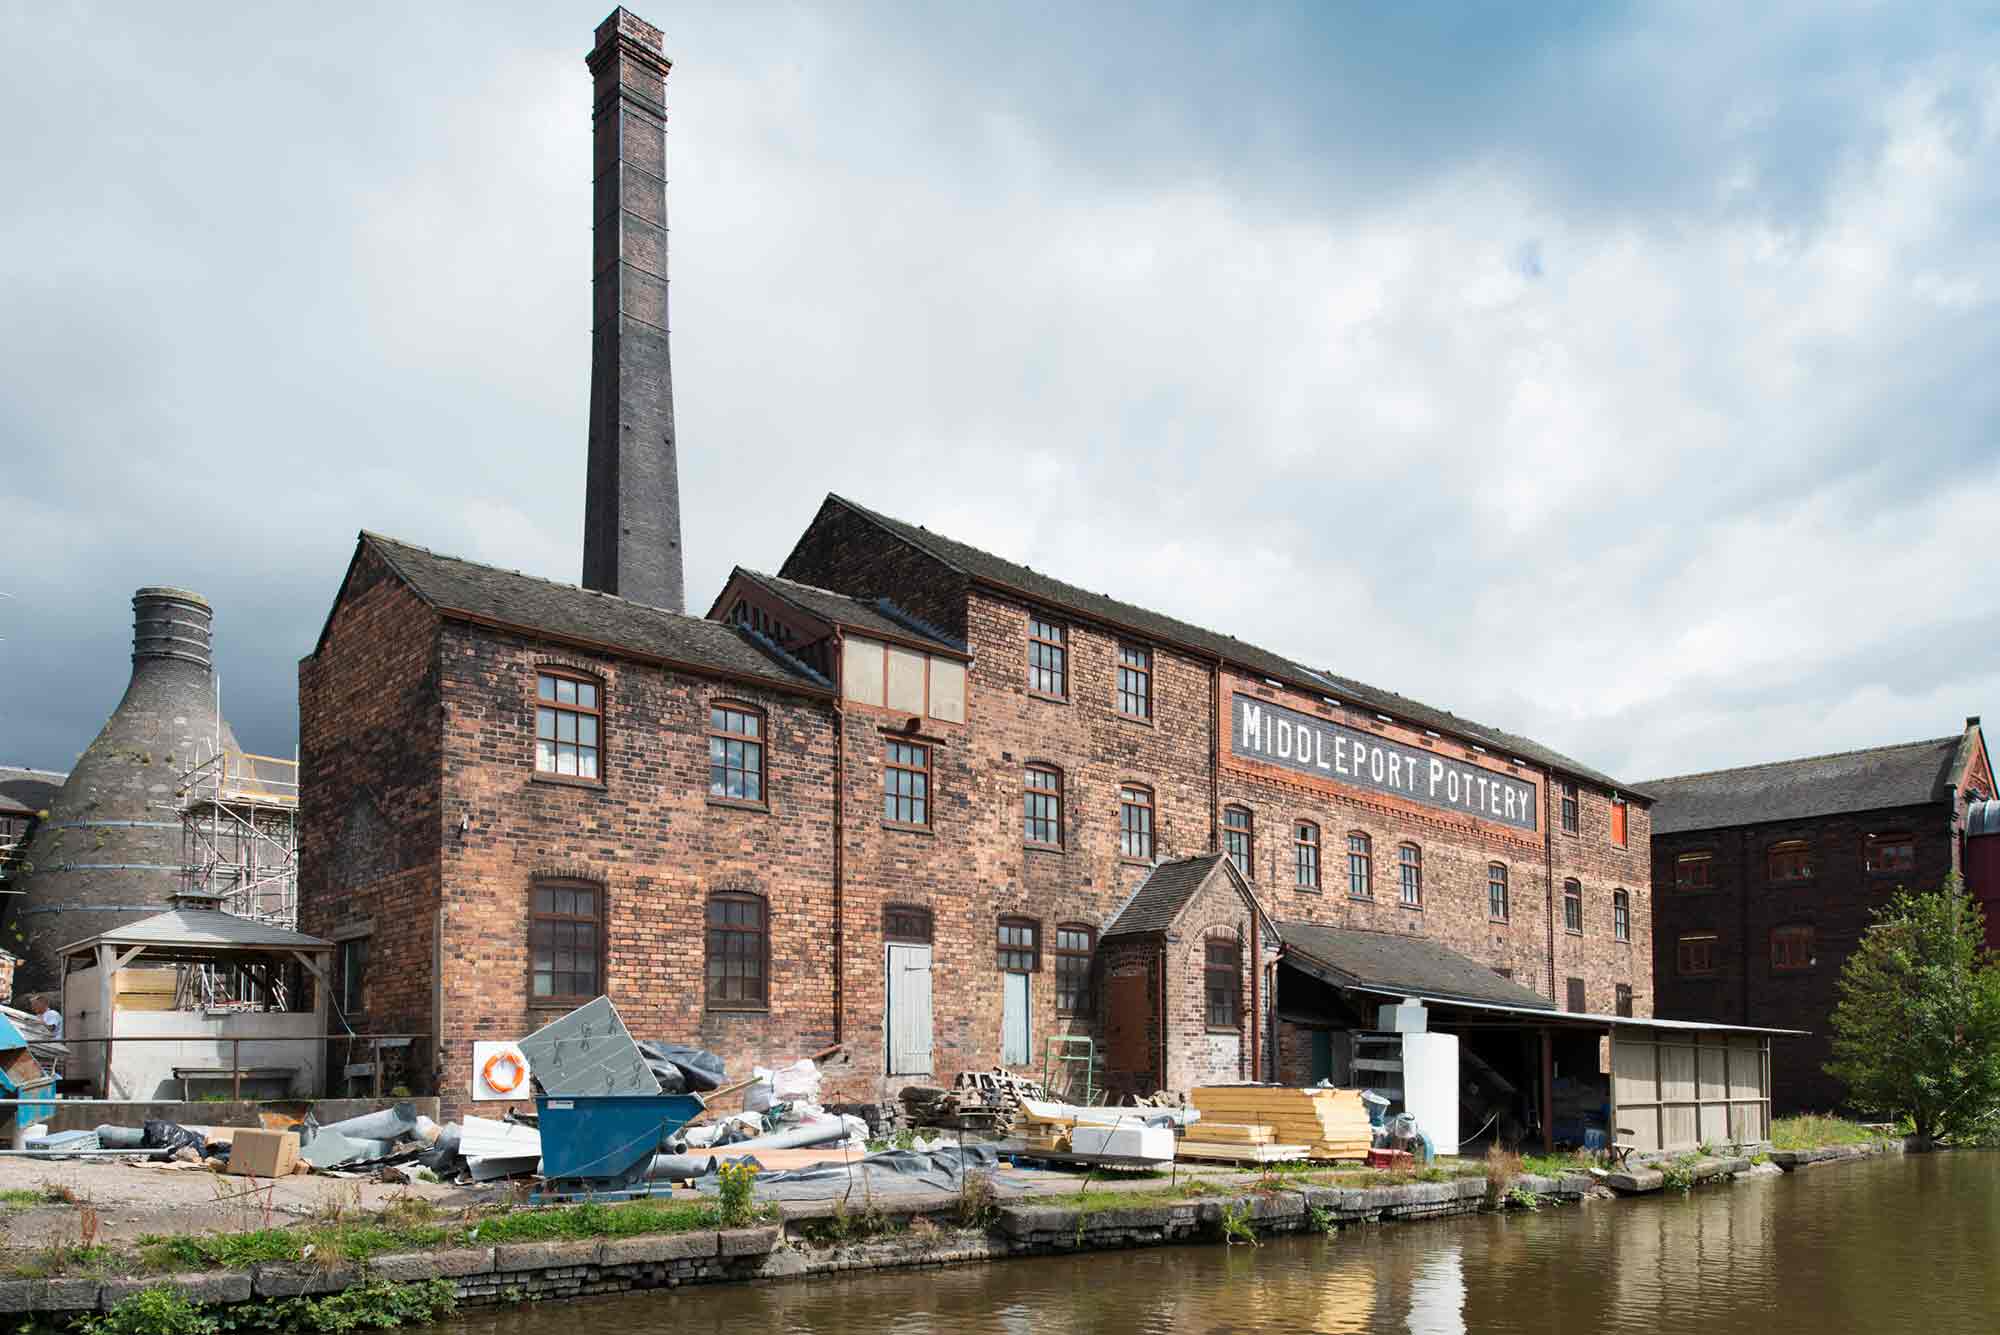 General view of Middleport Pottery from west across the Trent and Mersey Canal